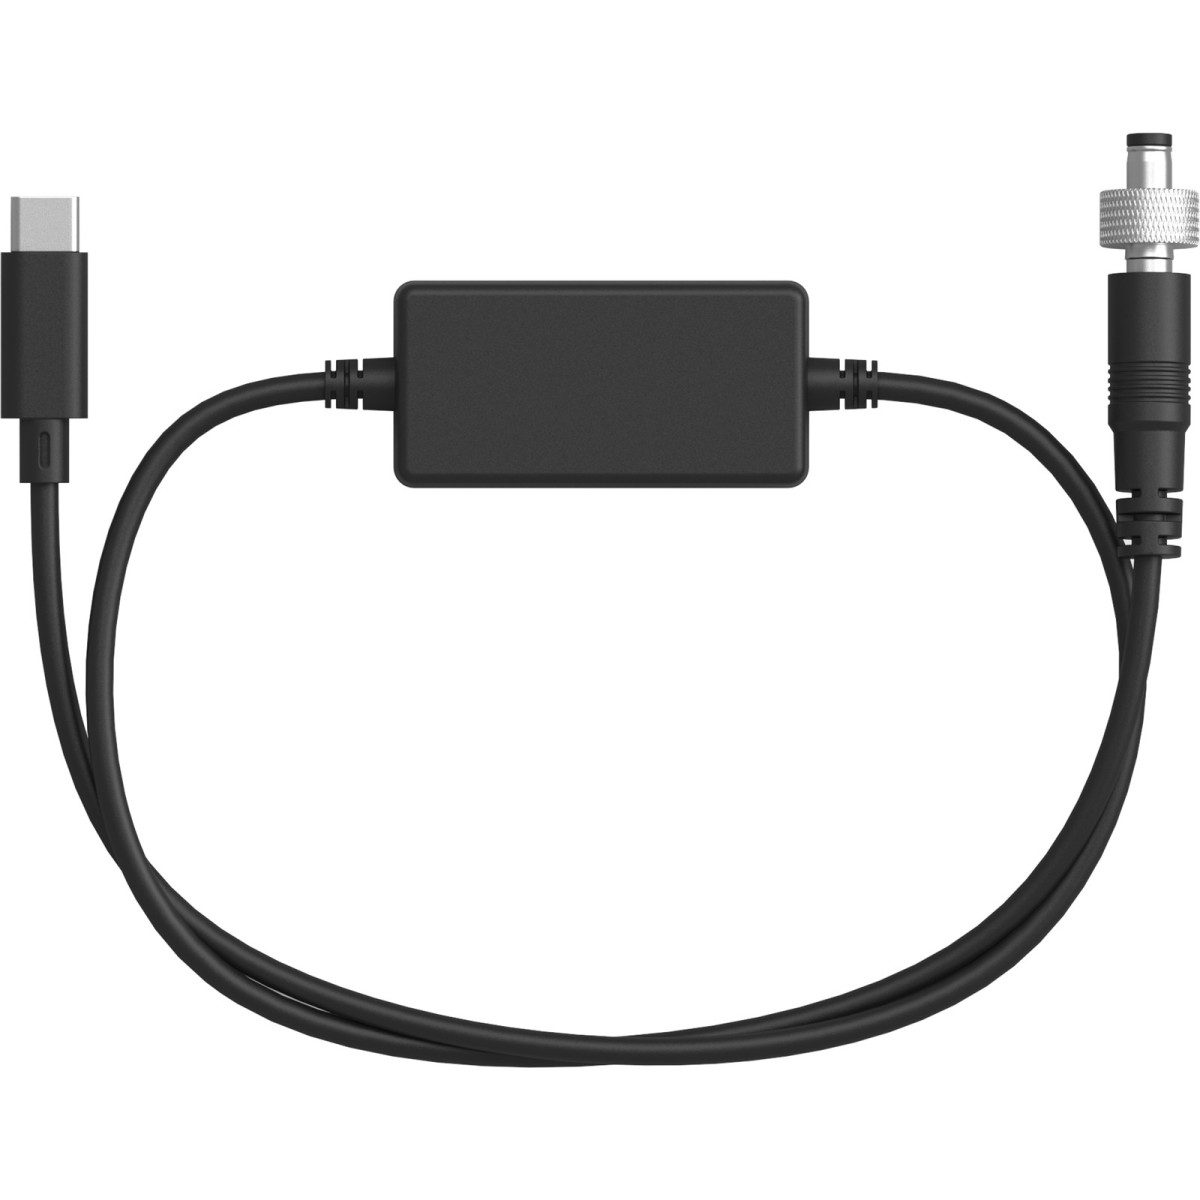 SmallRig USB-C to DC Power Cable for RC 30B 4540